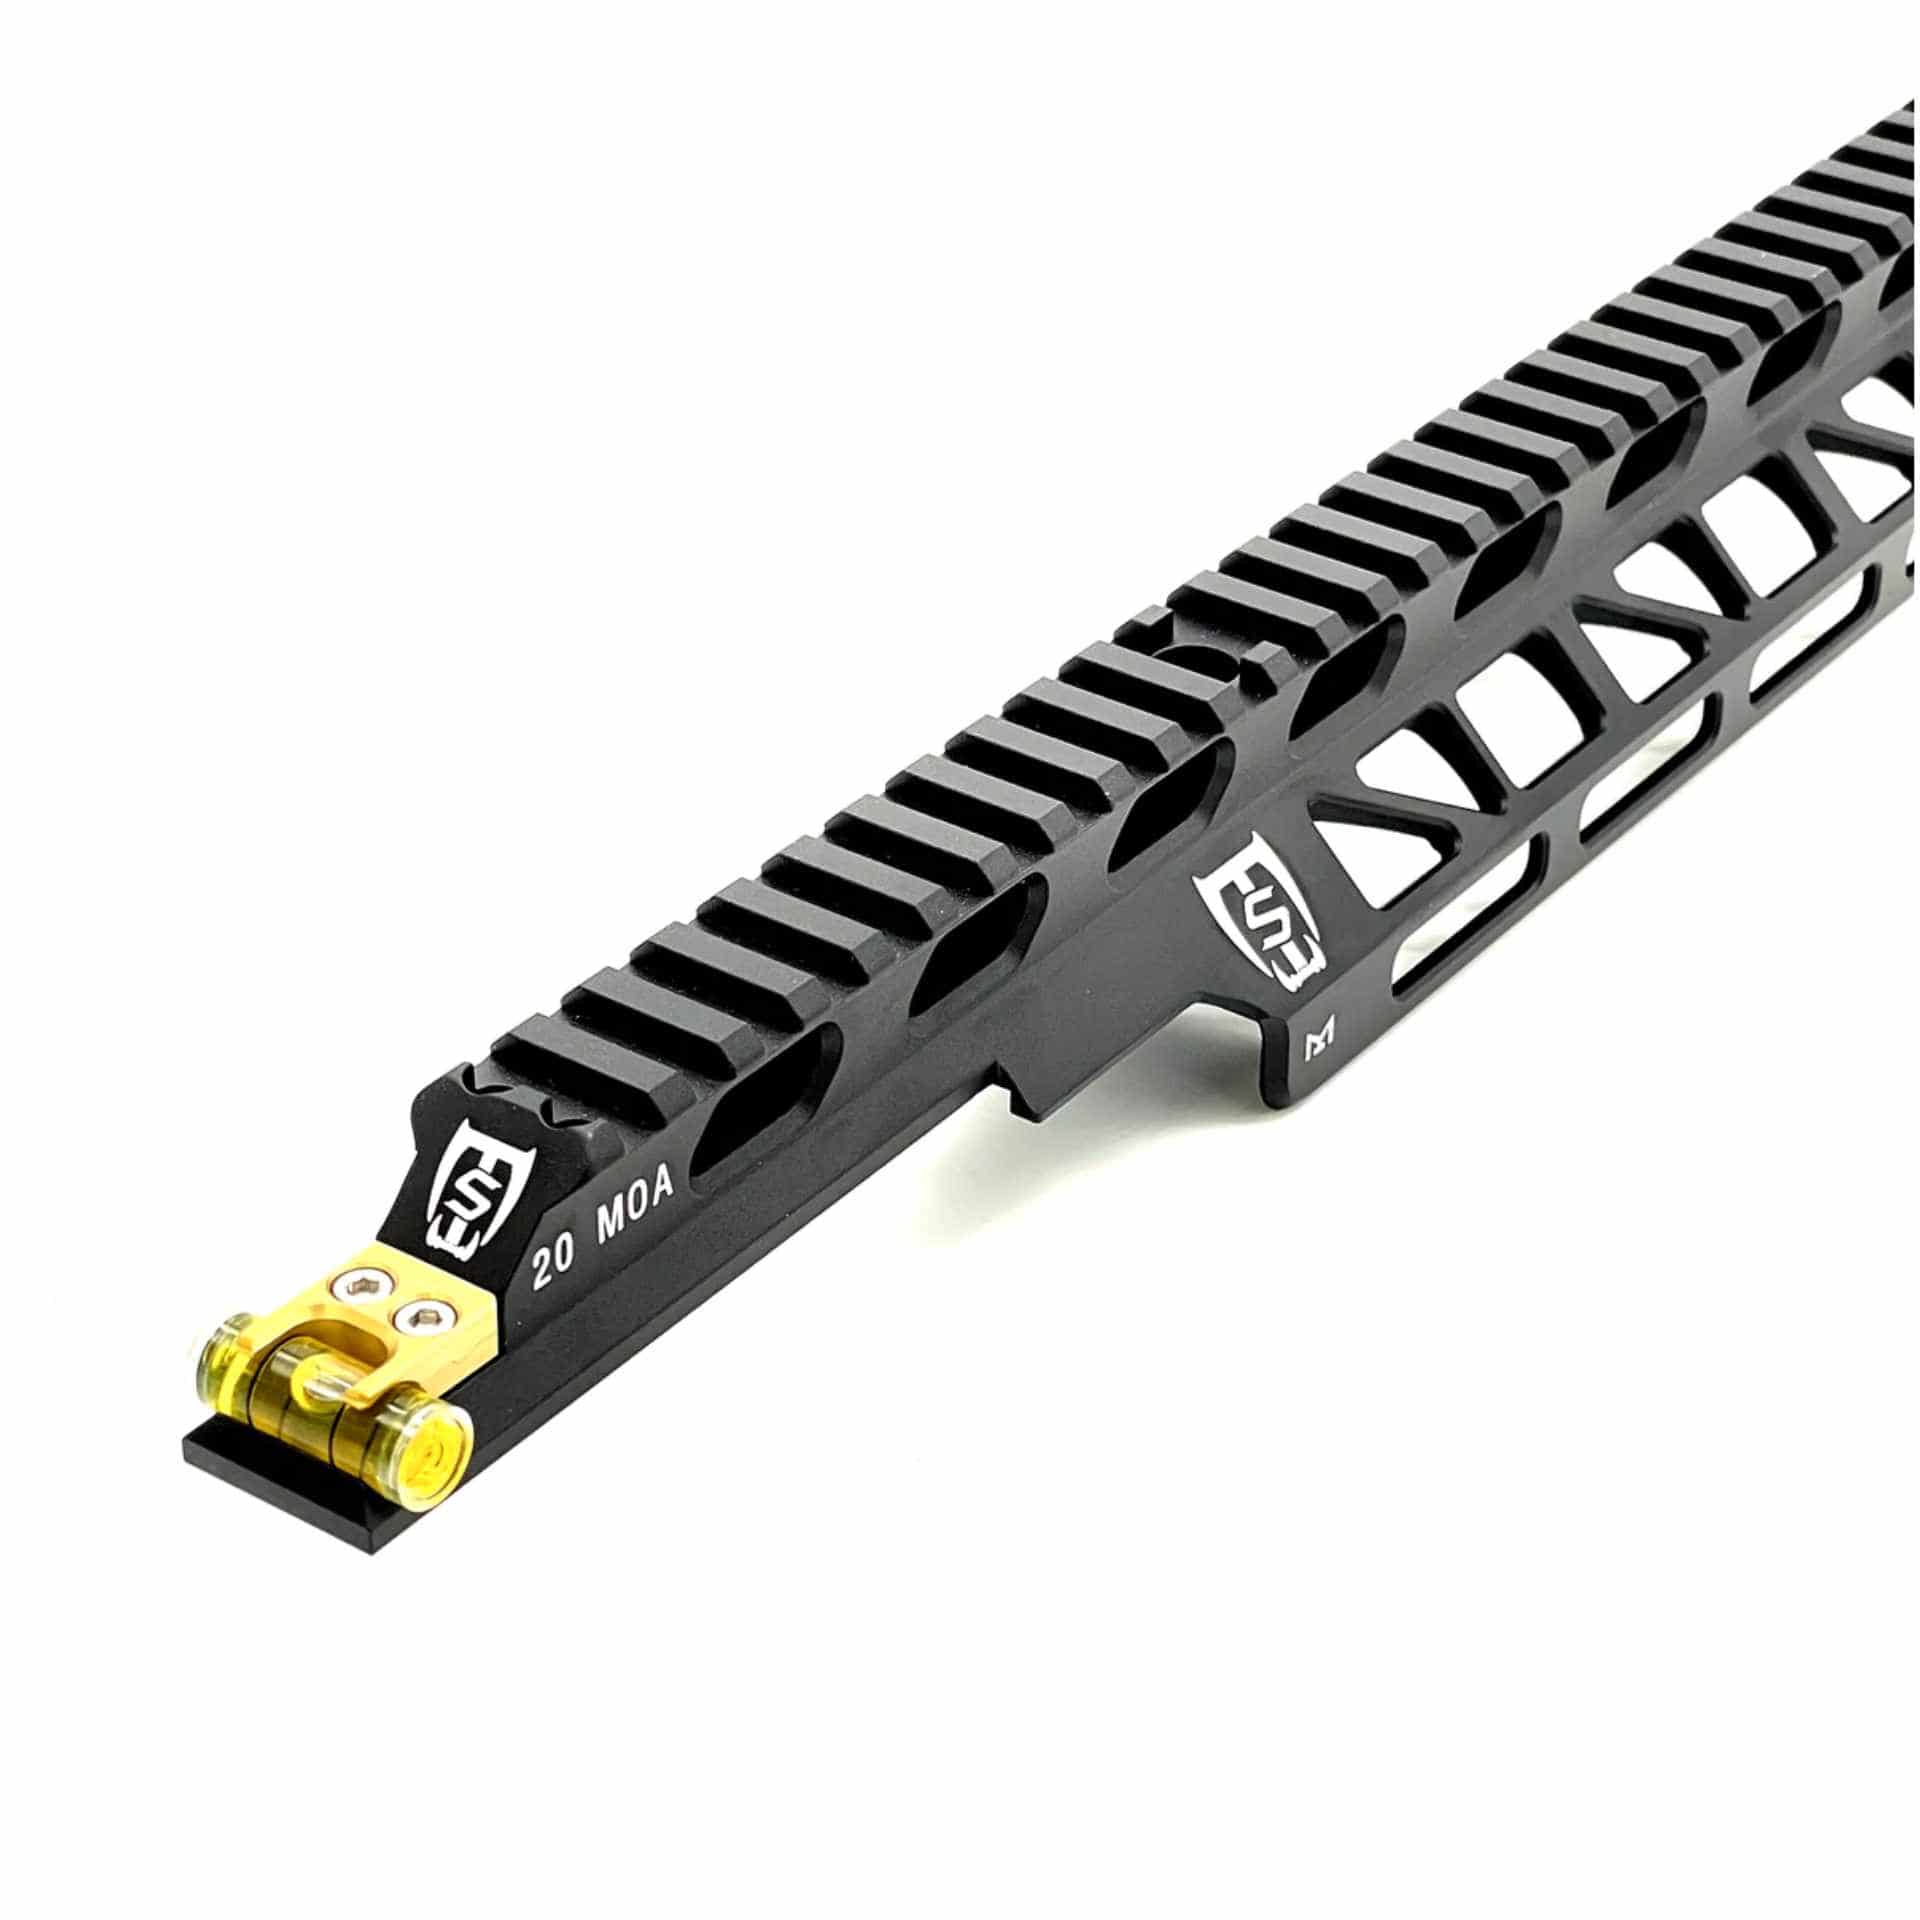 Saber Tactical Standard TRS Rail for FX Impact